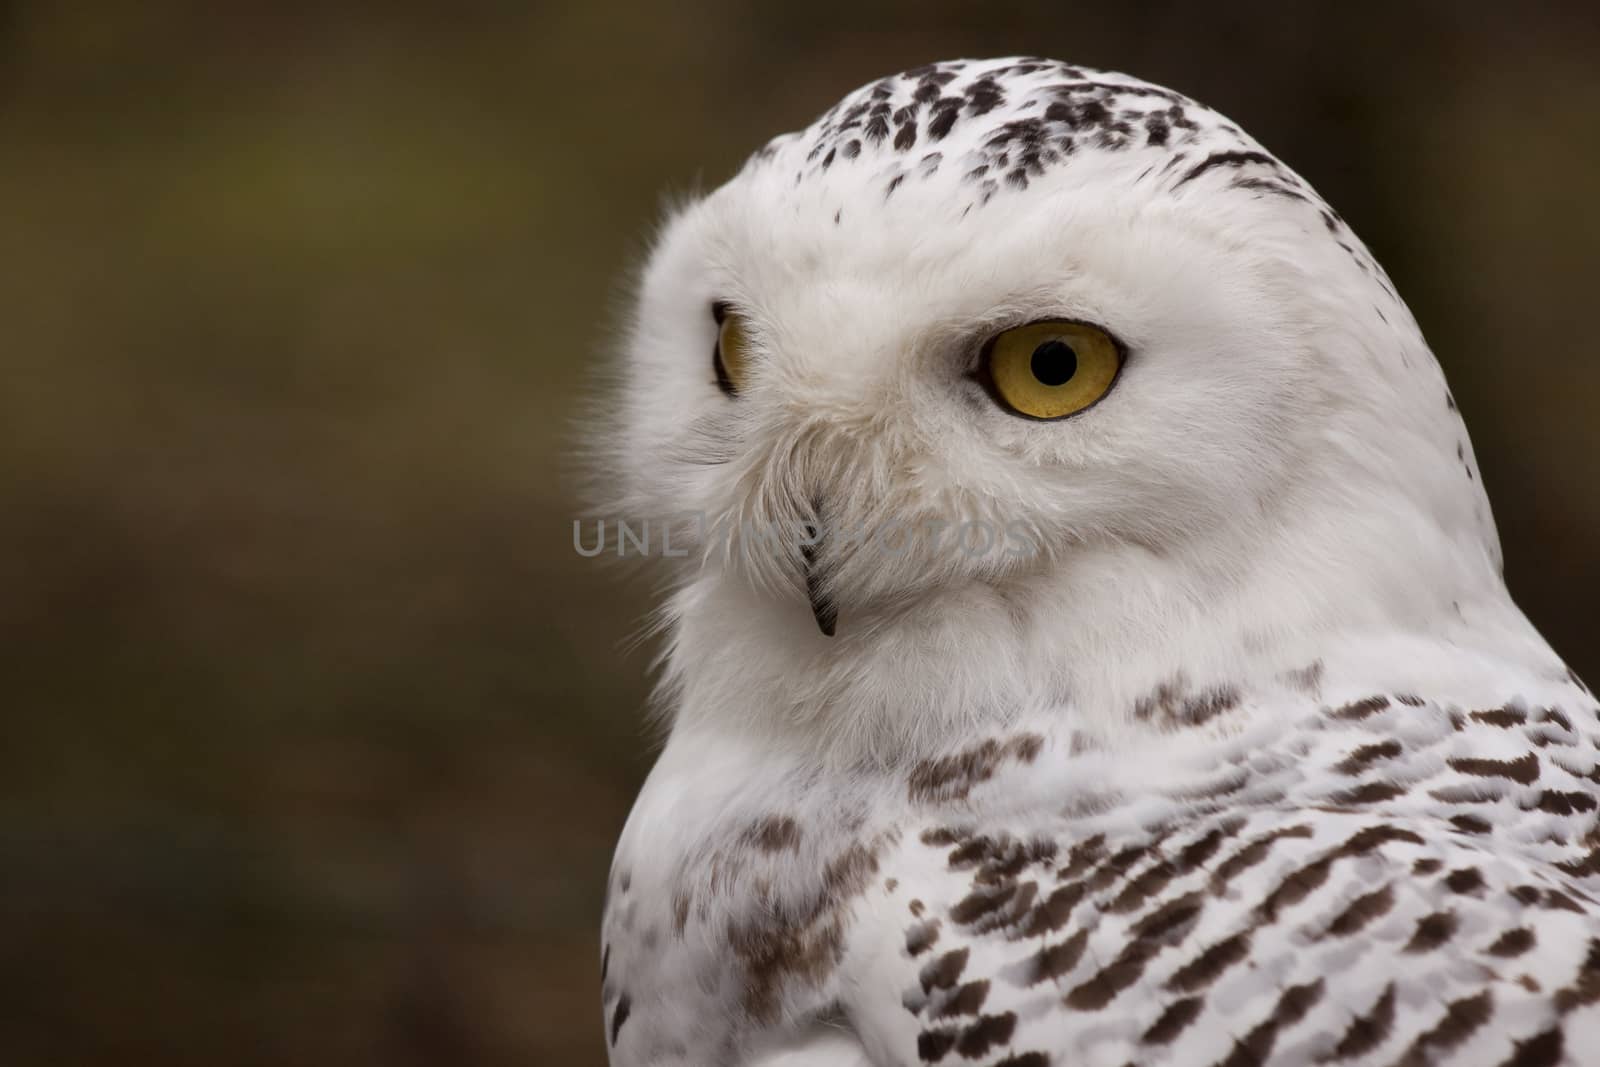 The photo of the snowy owl was taken in an animal sanctuary in Cumbria, England.